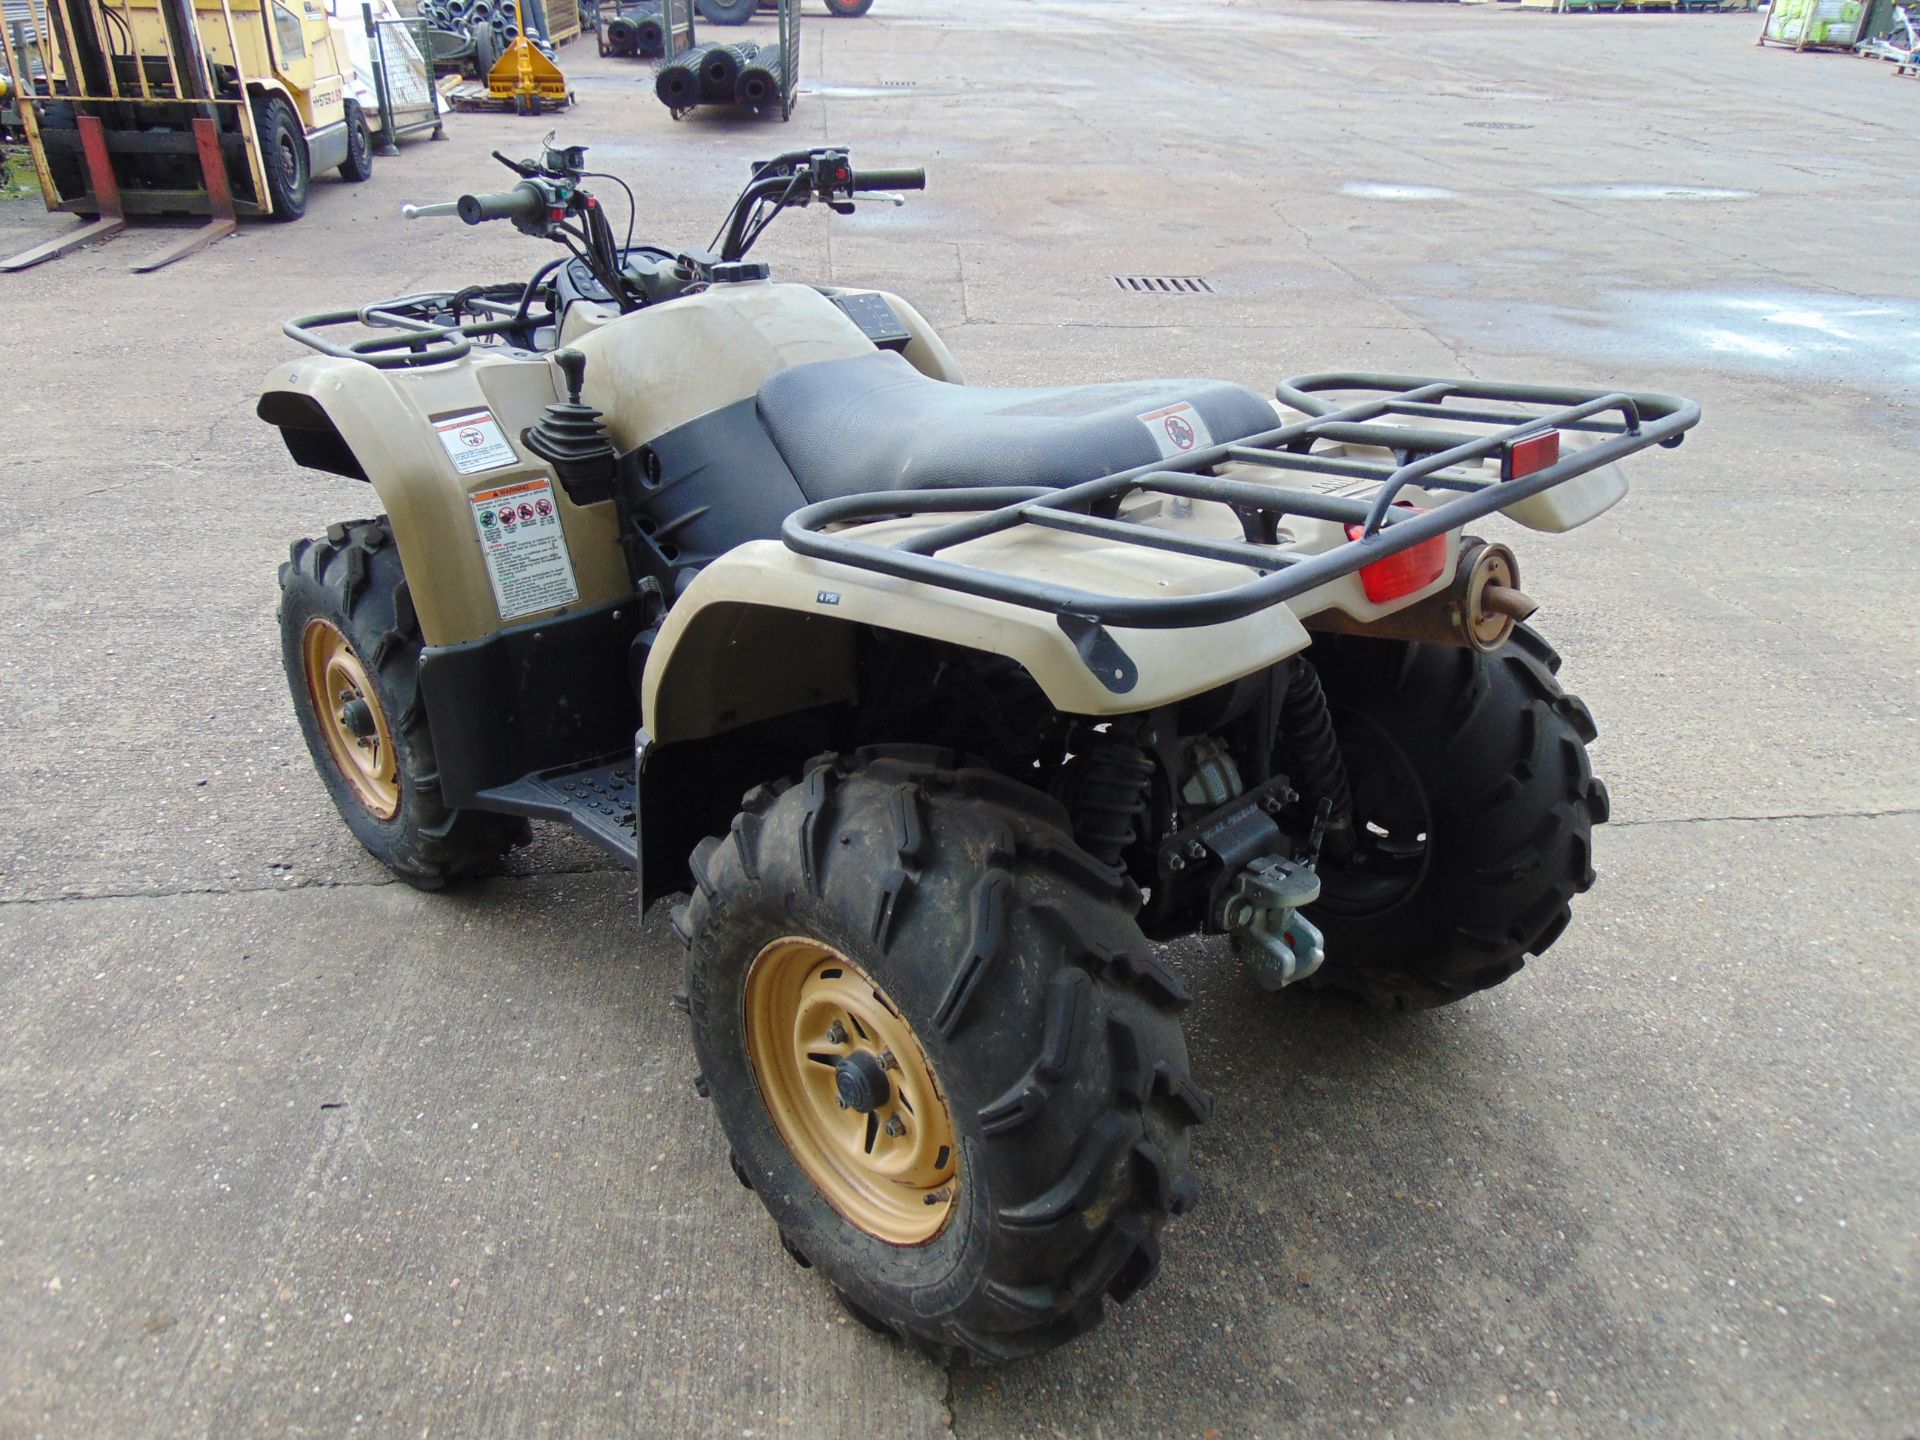 Military Specification Yamaha Grizzly 450 4 x 4 ATV Quad Bike Complete with Winch ONLY 591 HOURS! - Image 8 of 16